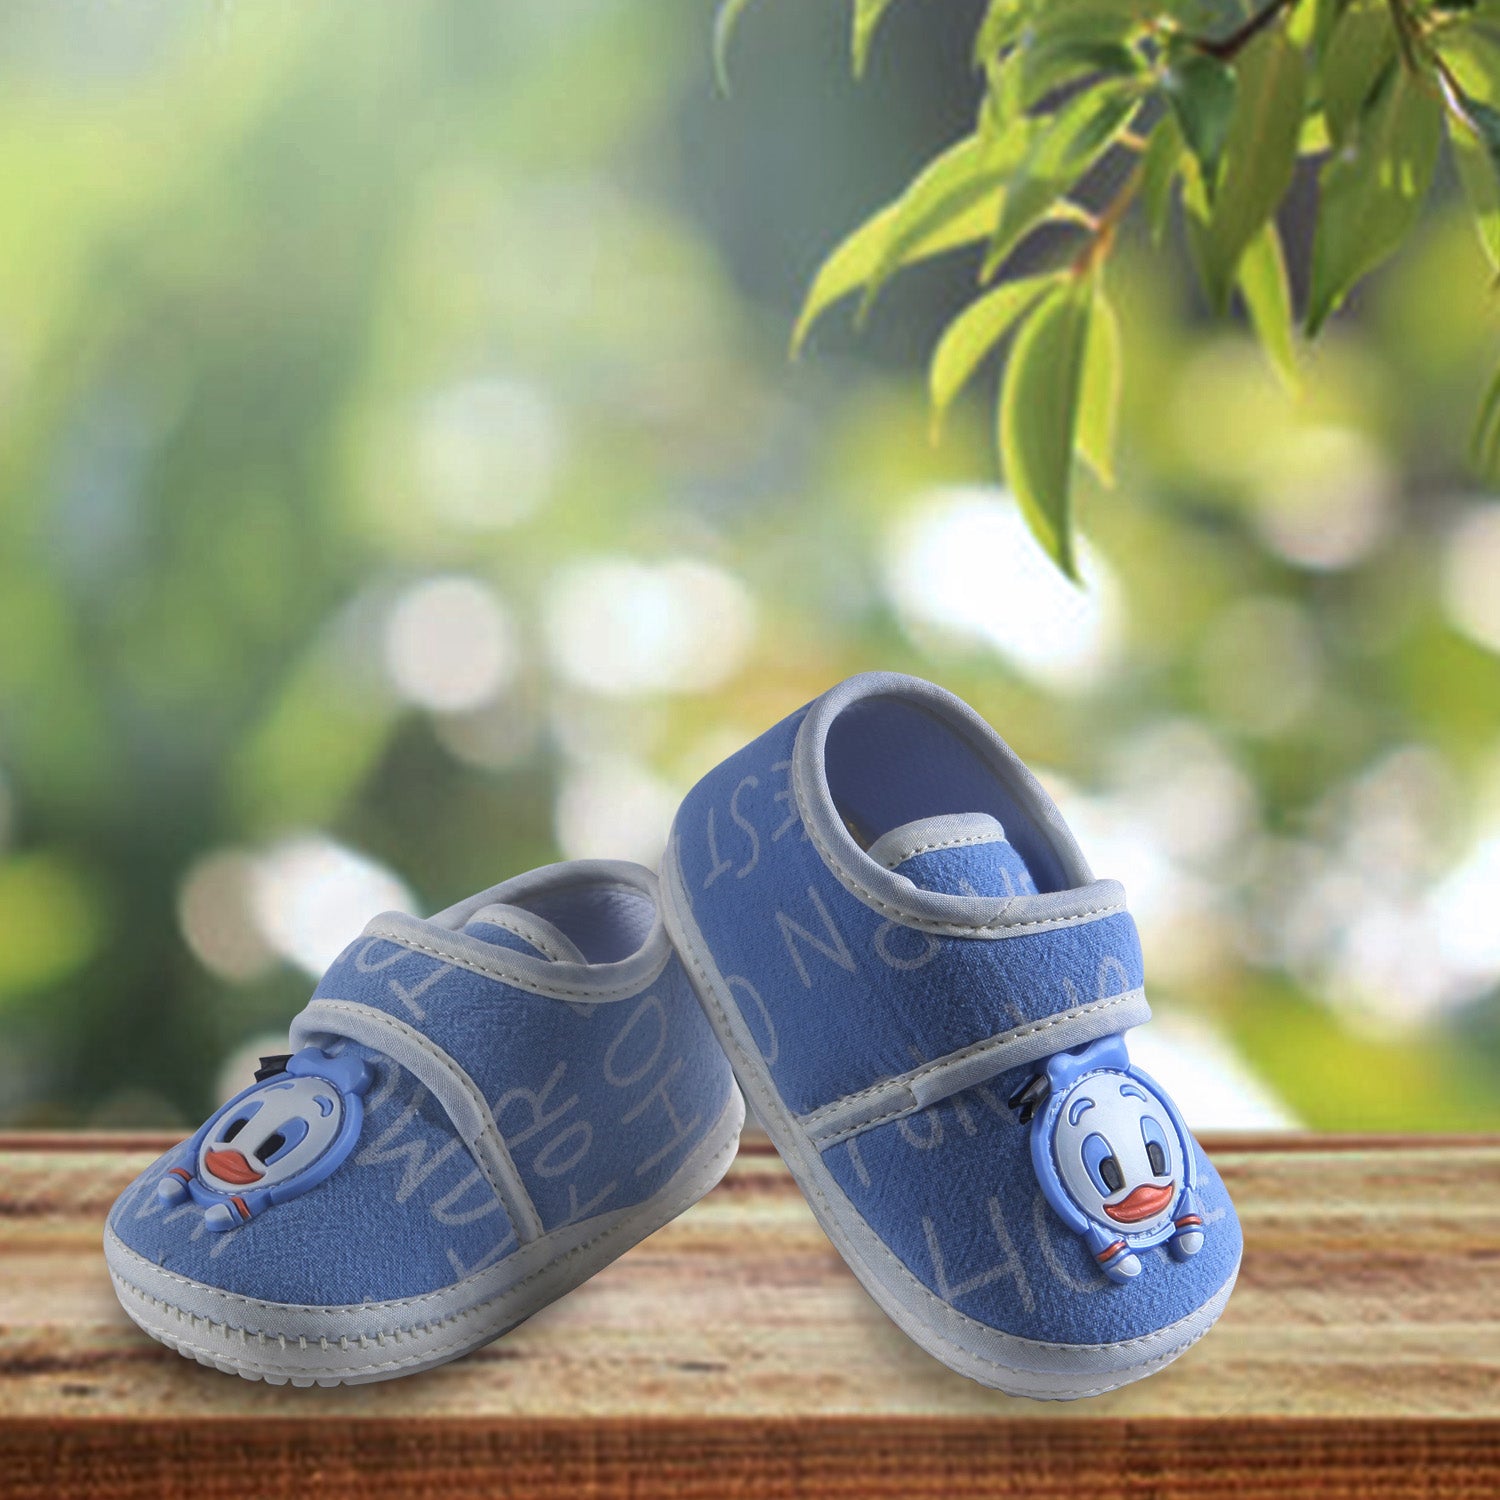 Non-slip Booties with Strap Kids Shoes Duck - Blue